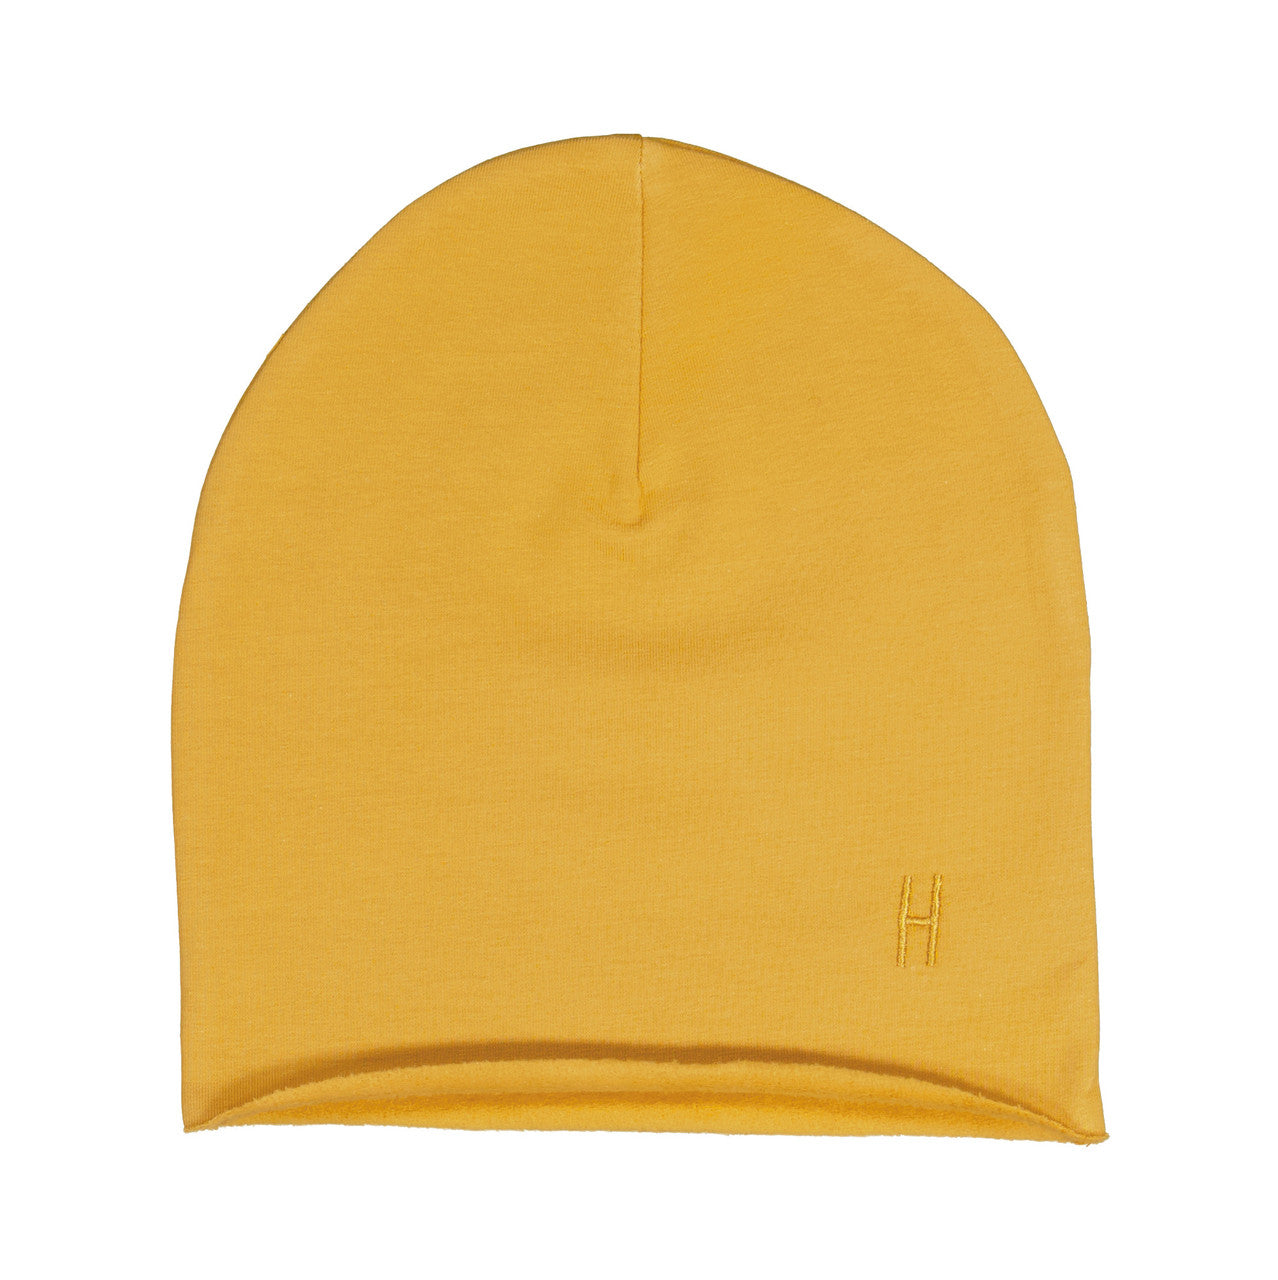 Organic cotton beanie, brushed inside for comfort and warmth, in Amber Gold